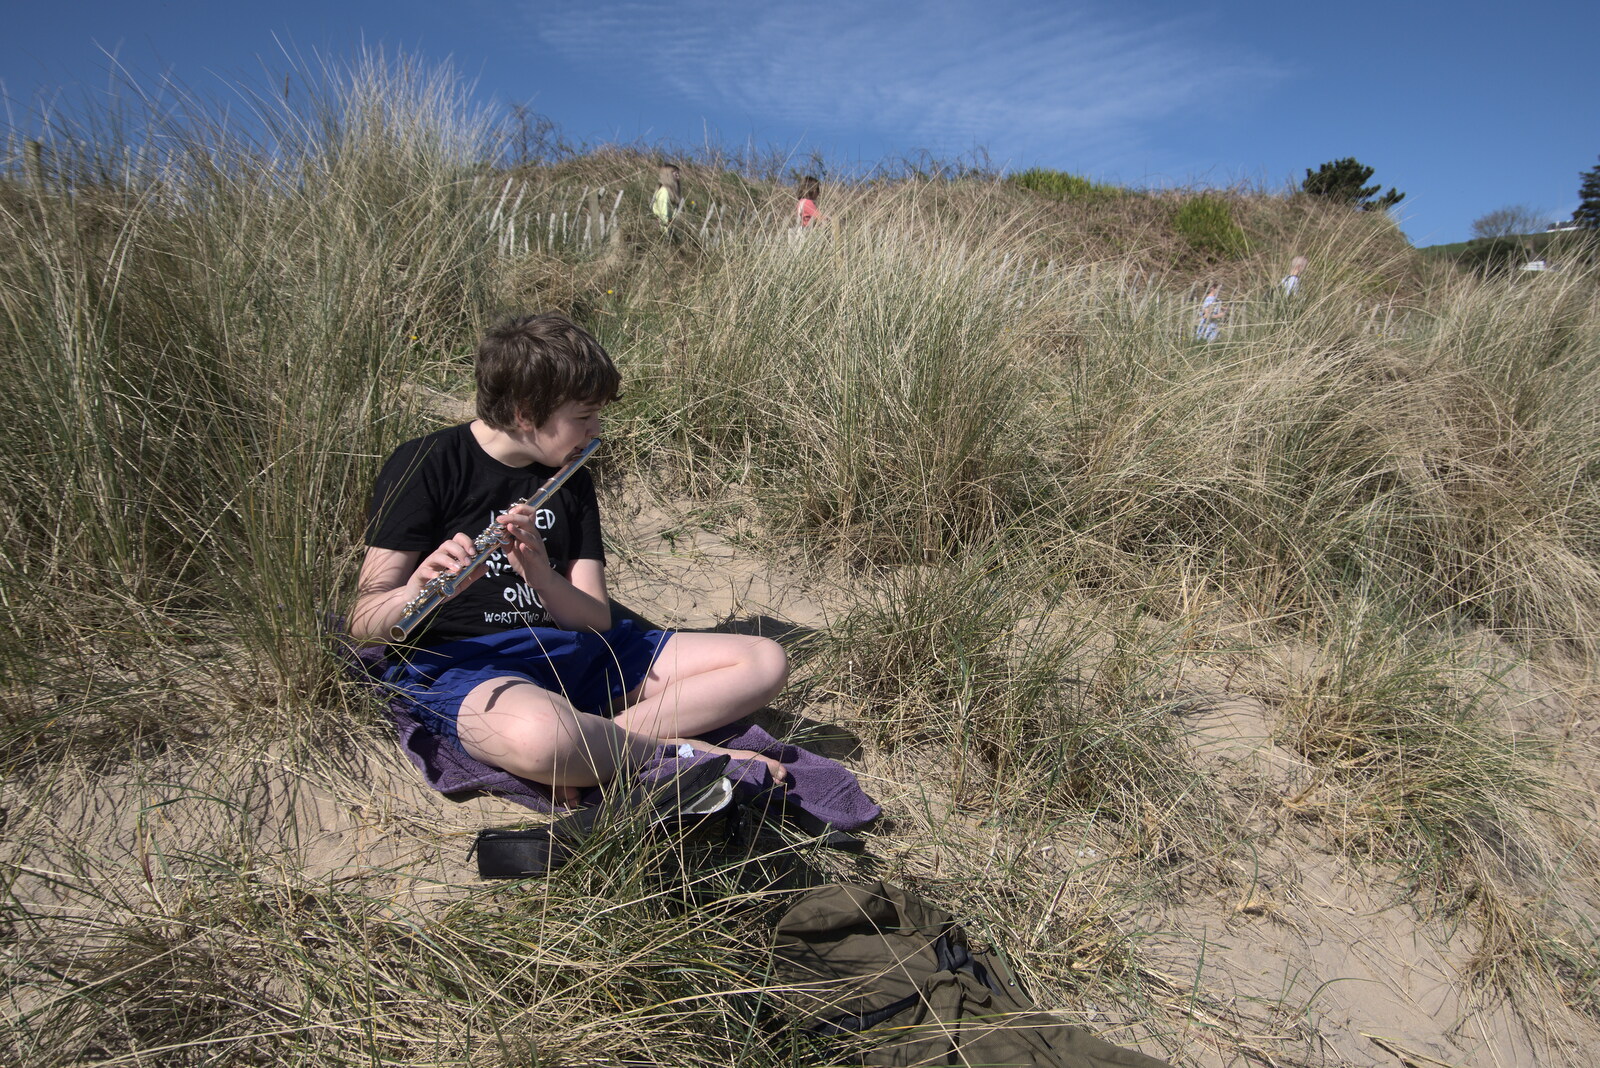 Greencastle, Doagh and Malin Head, County Donegal, Ireland - 19th April 2022: Fred plays flute in the dunes